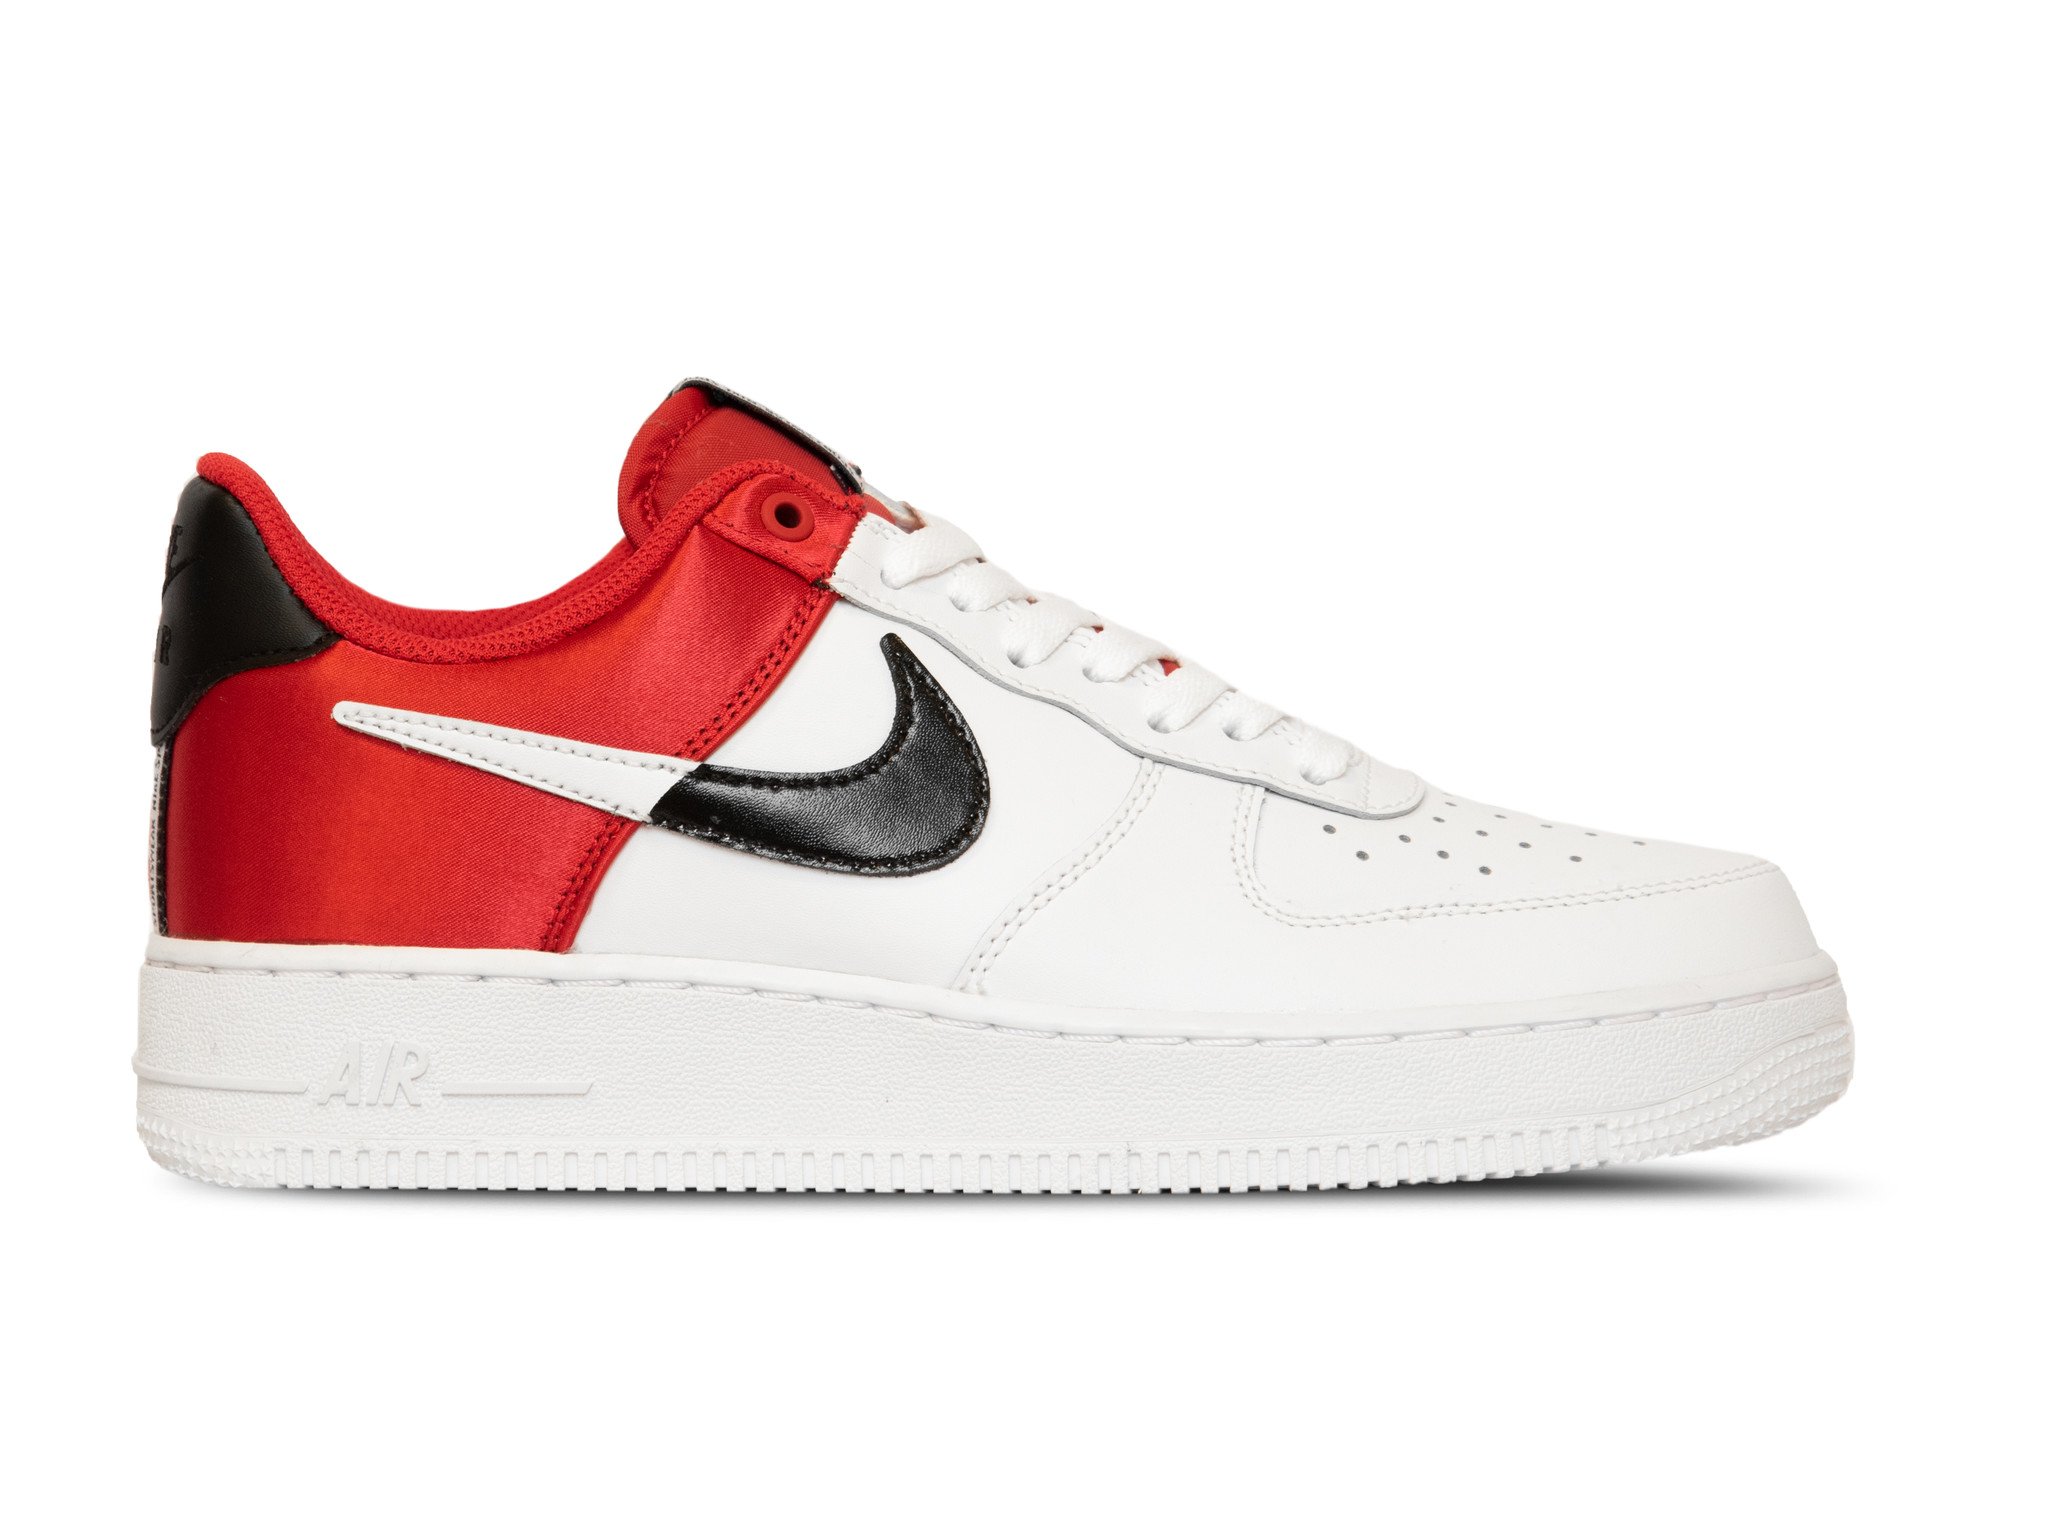 air force one white blue red